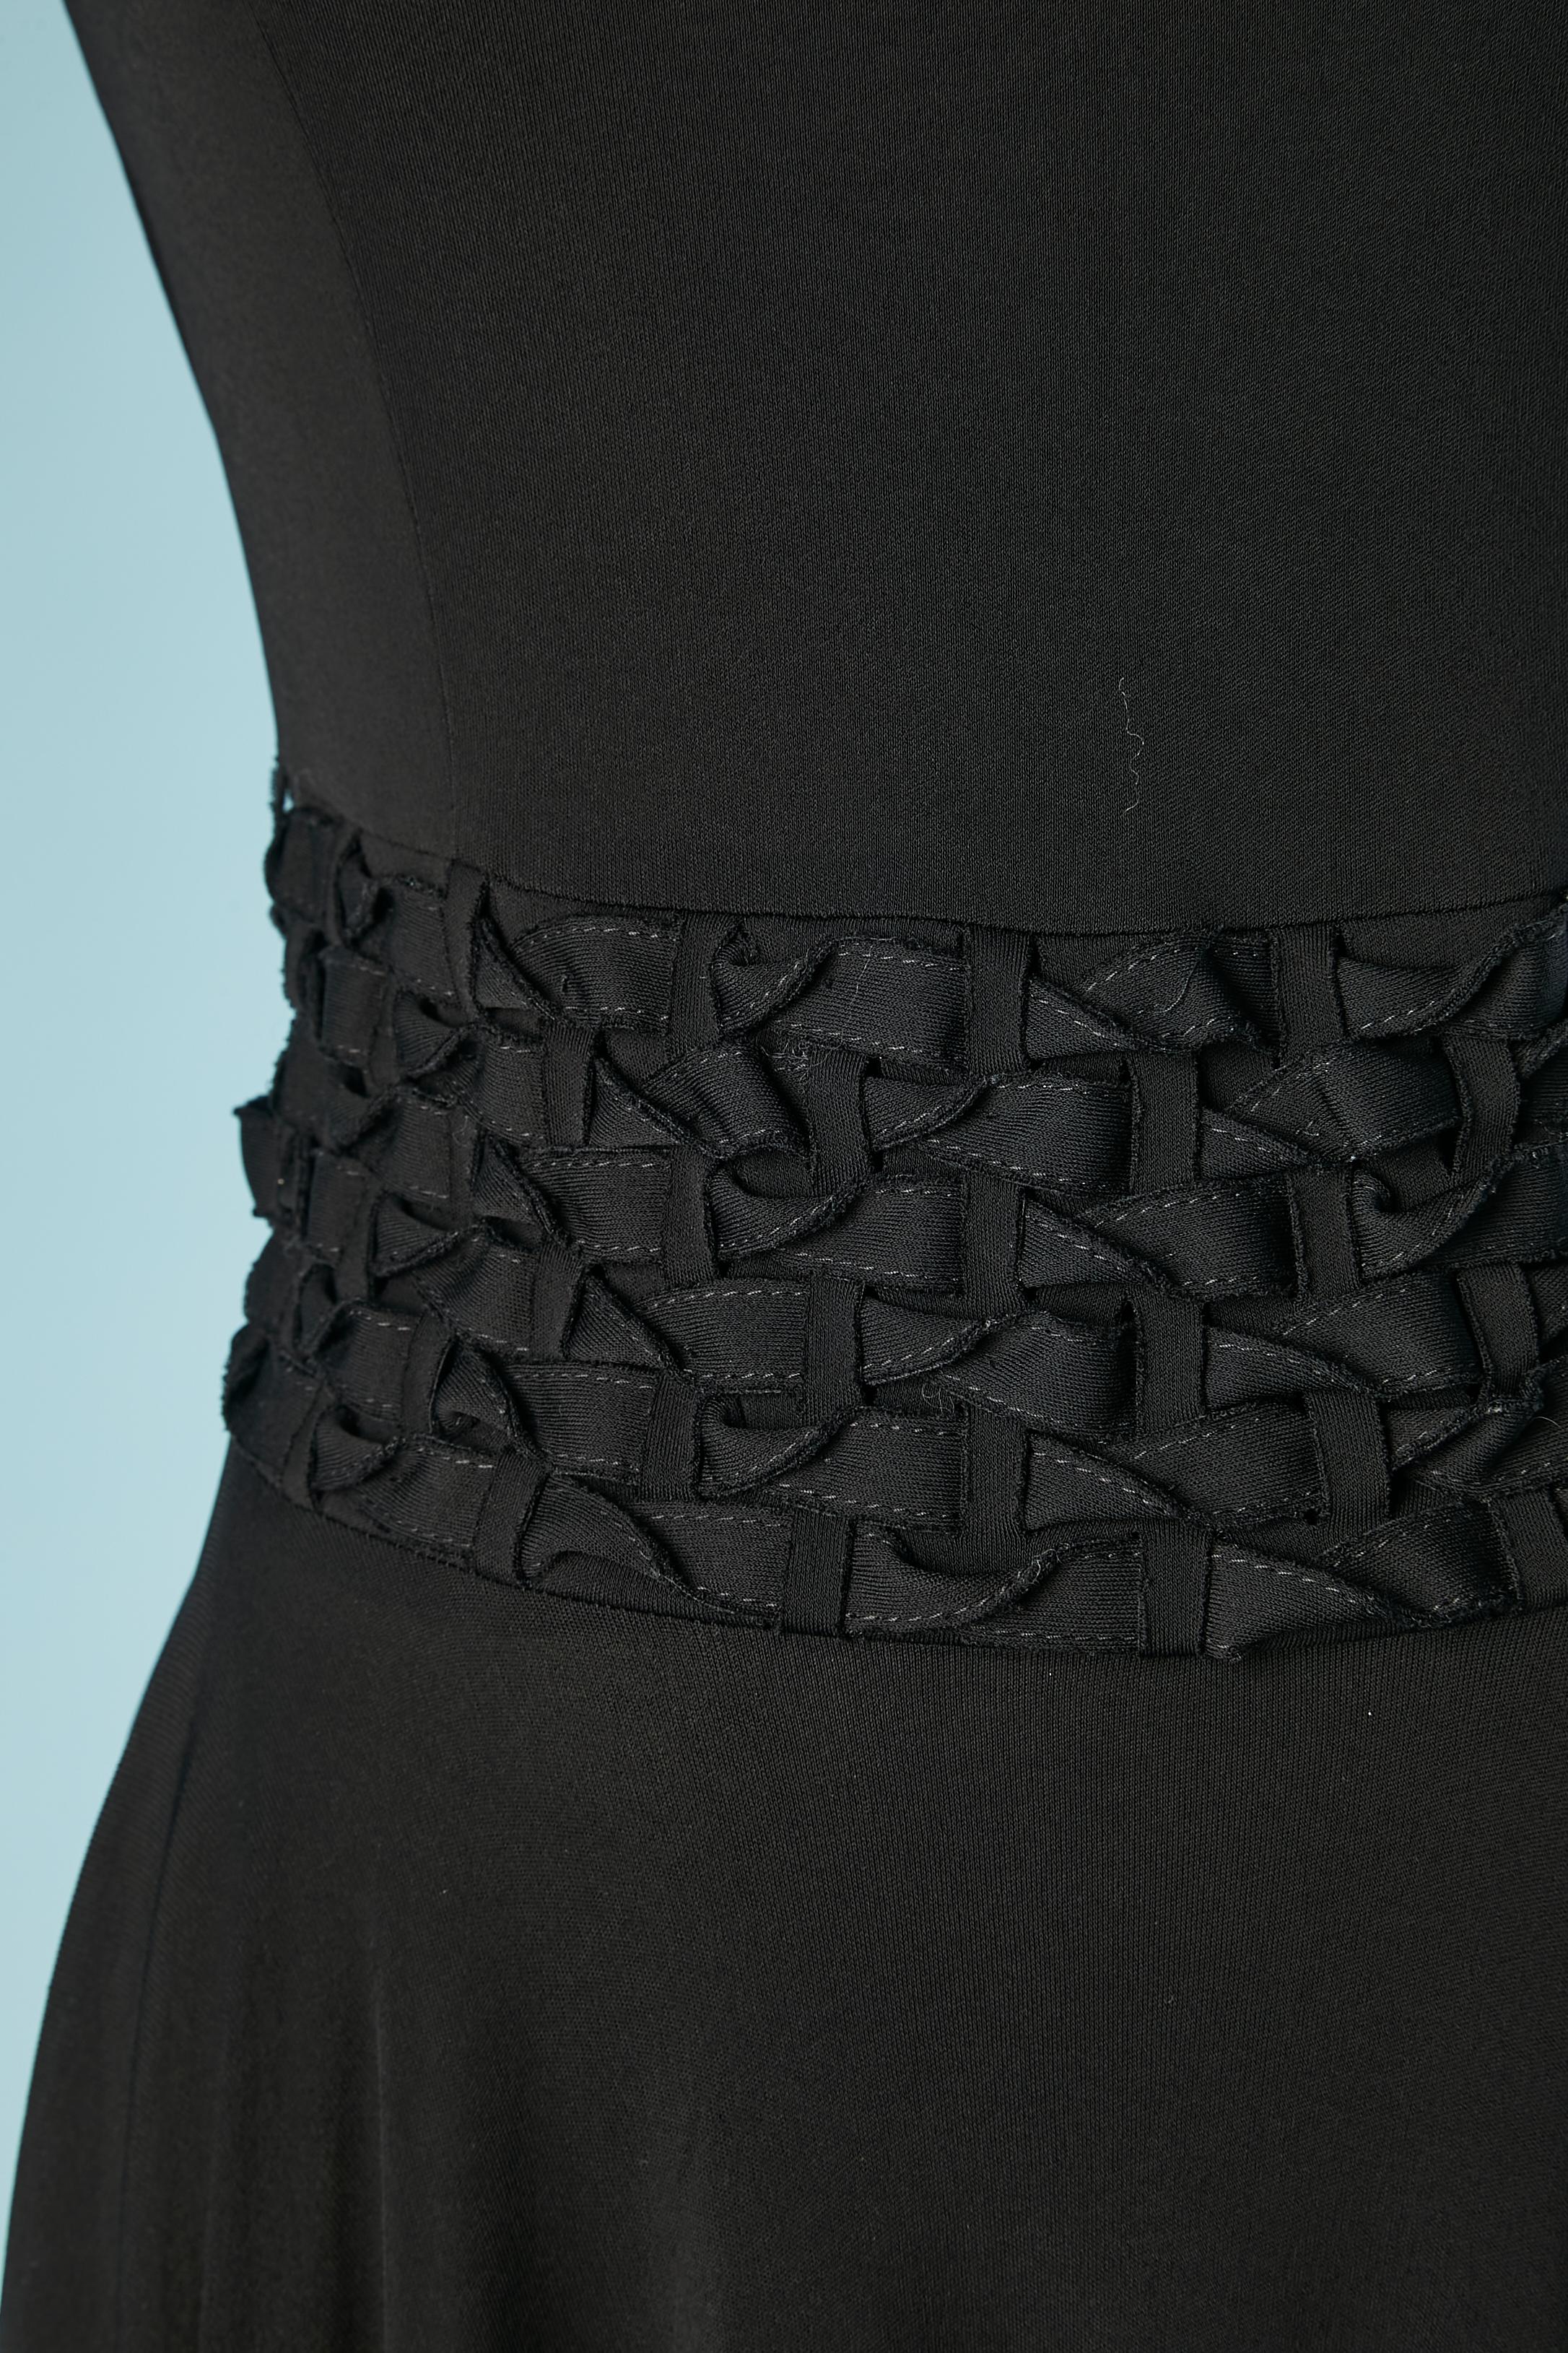 Black jersey cocktail dress with fabric strips braided belt. Fabric composition: rayon
Snap on the left side of the waist to close the belt. 
SIZE 36 (Fr) 6 (US) M 